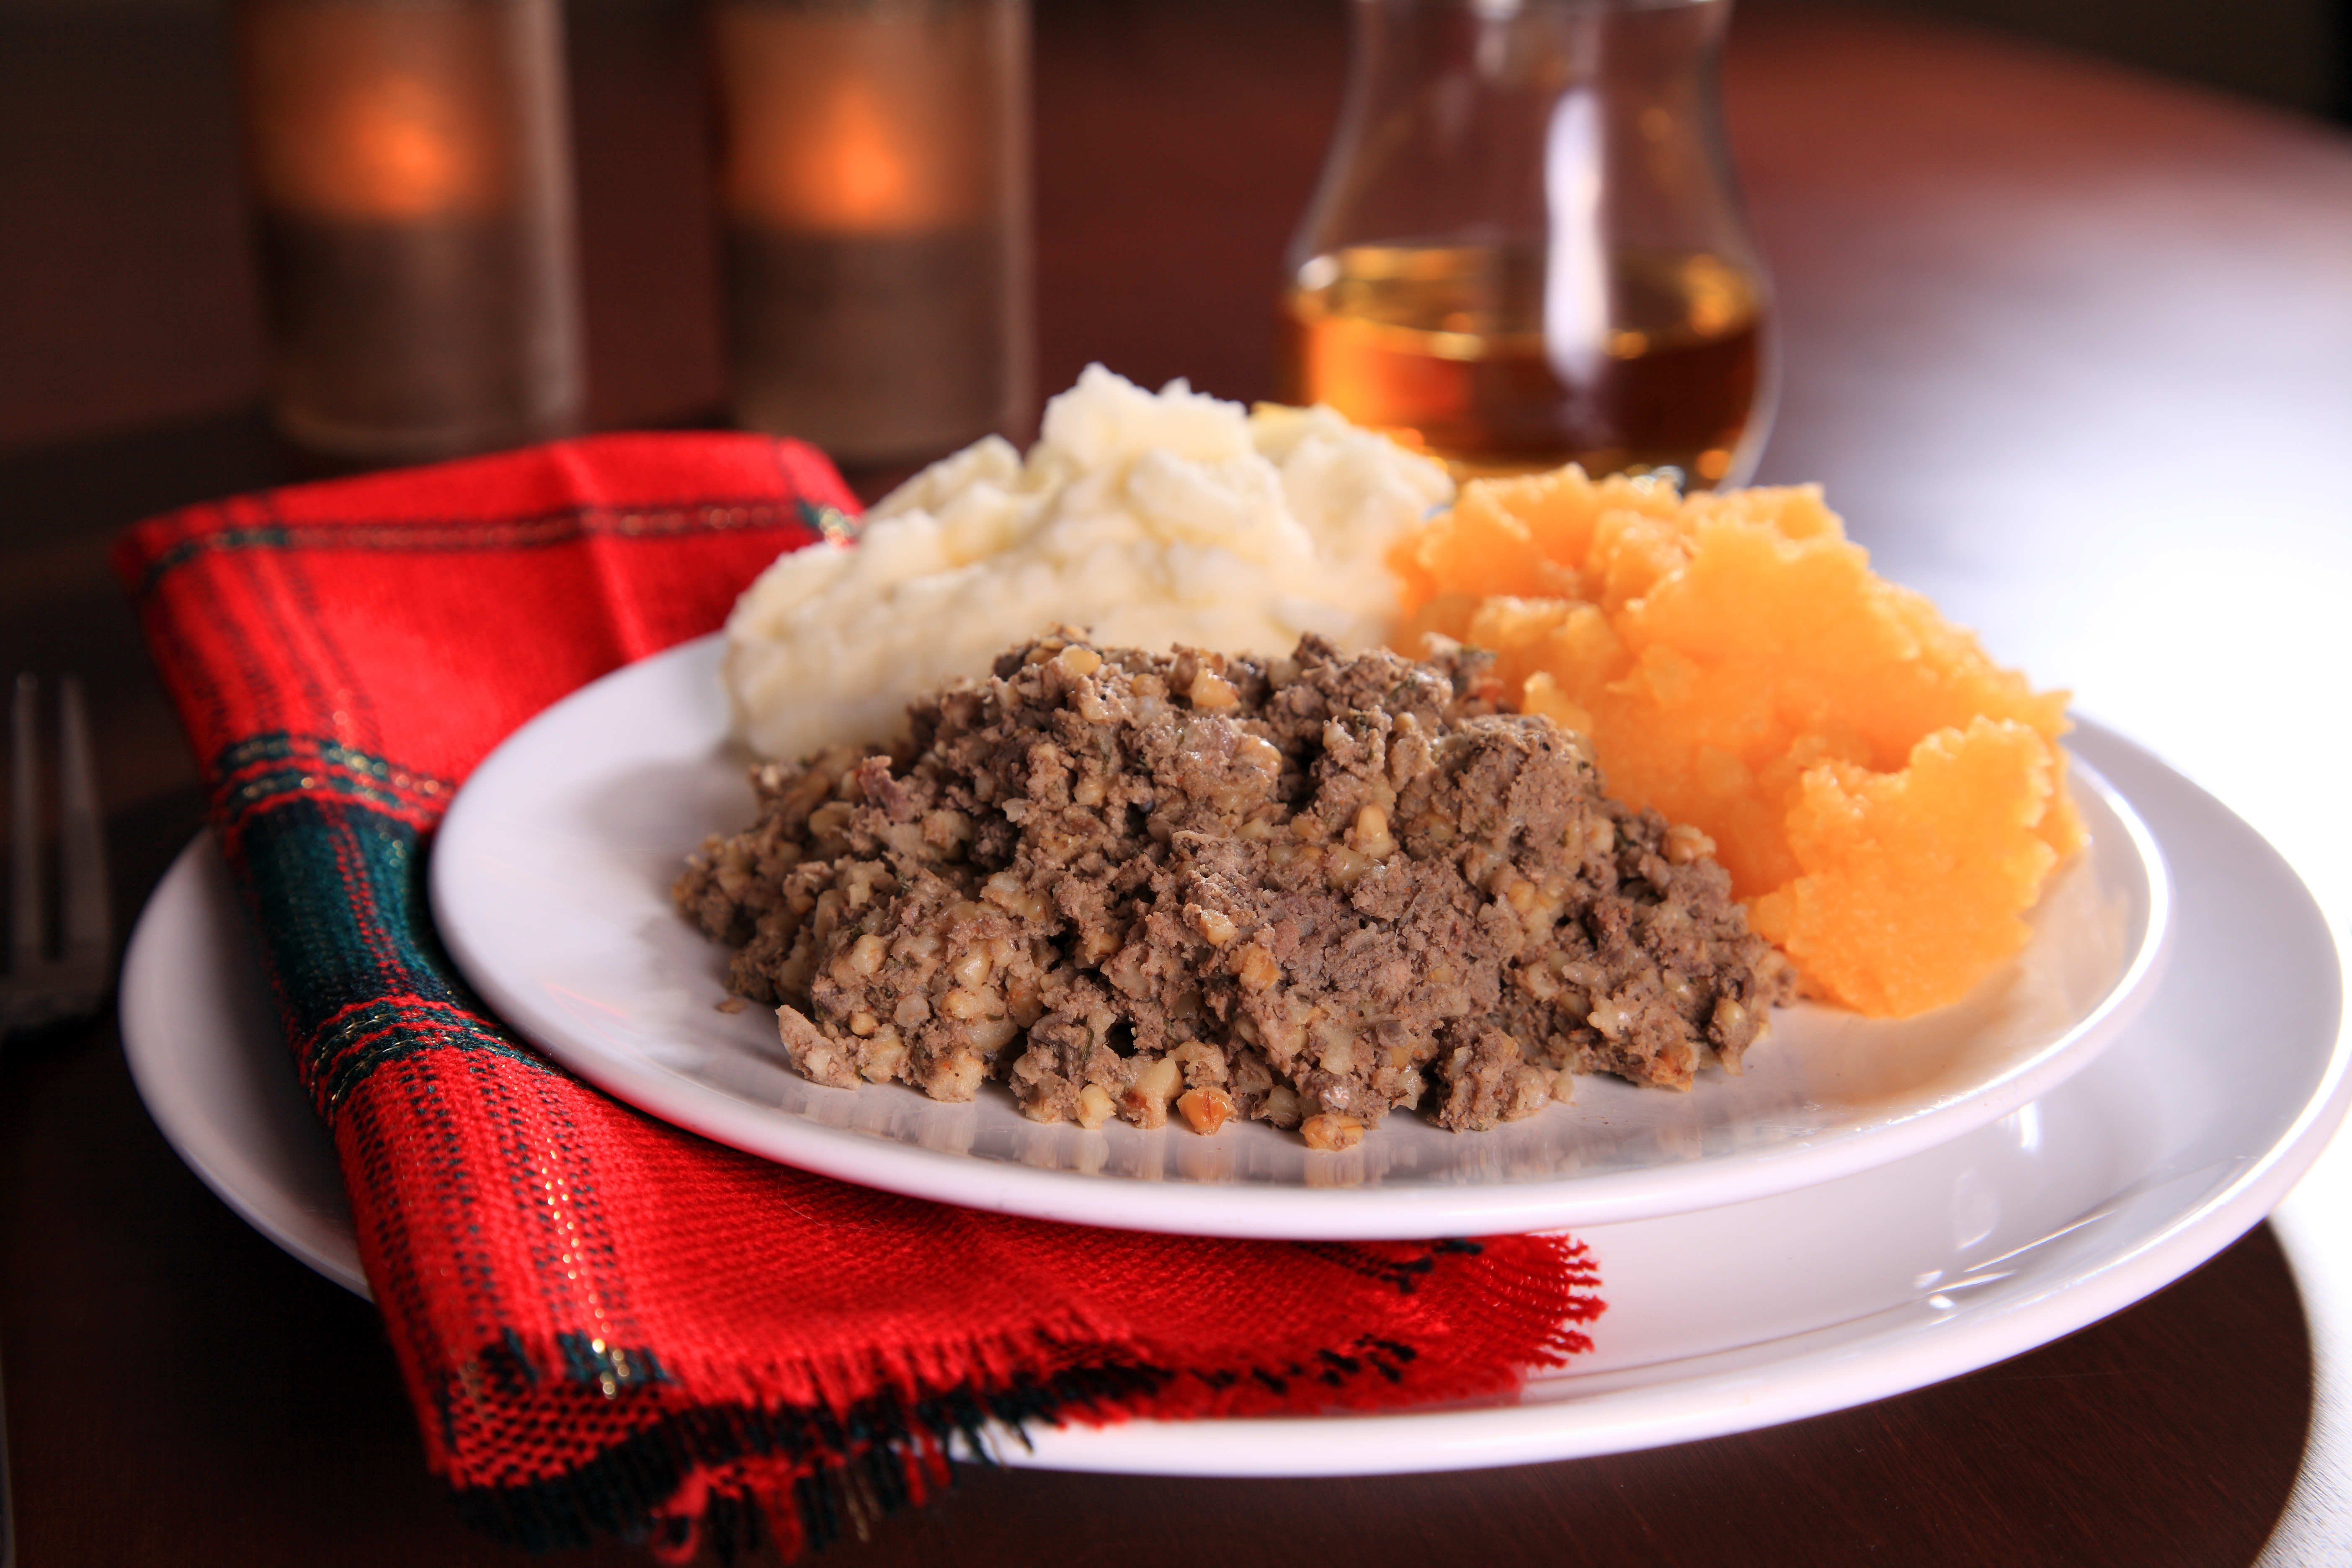 Not everyone enjoys a traditional Burns supper